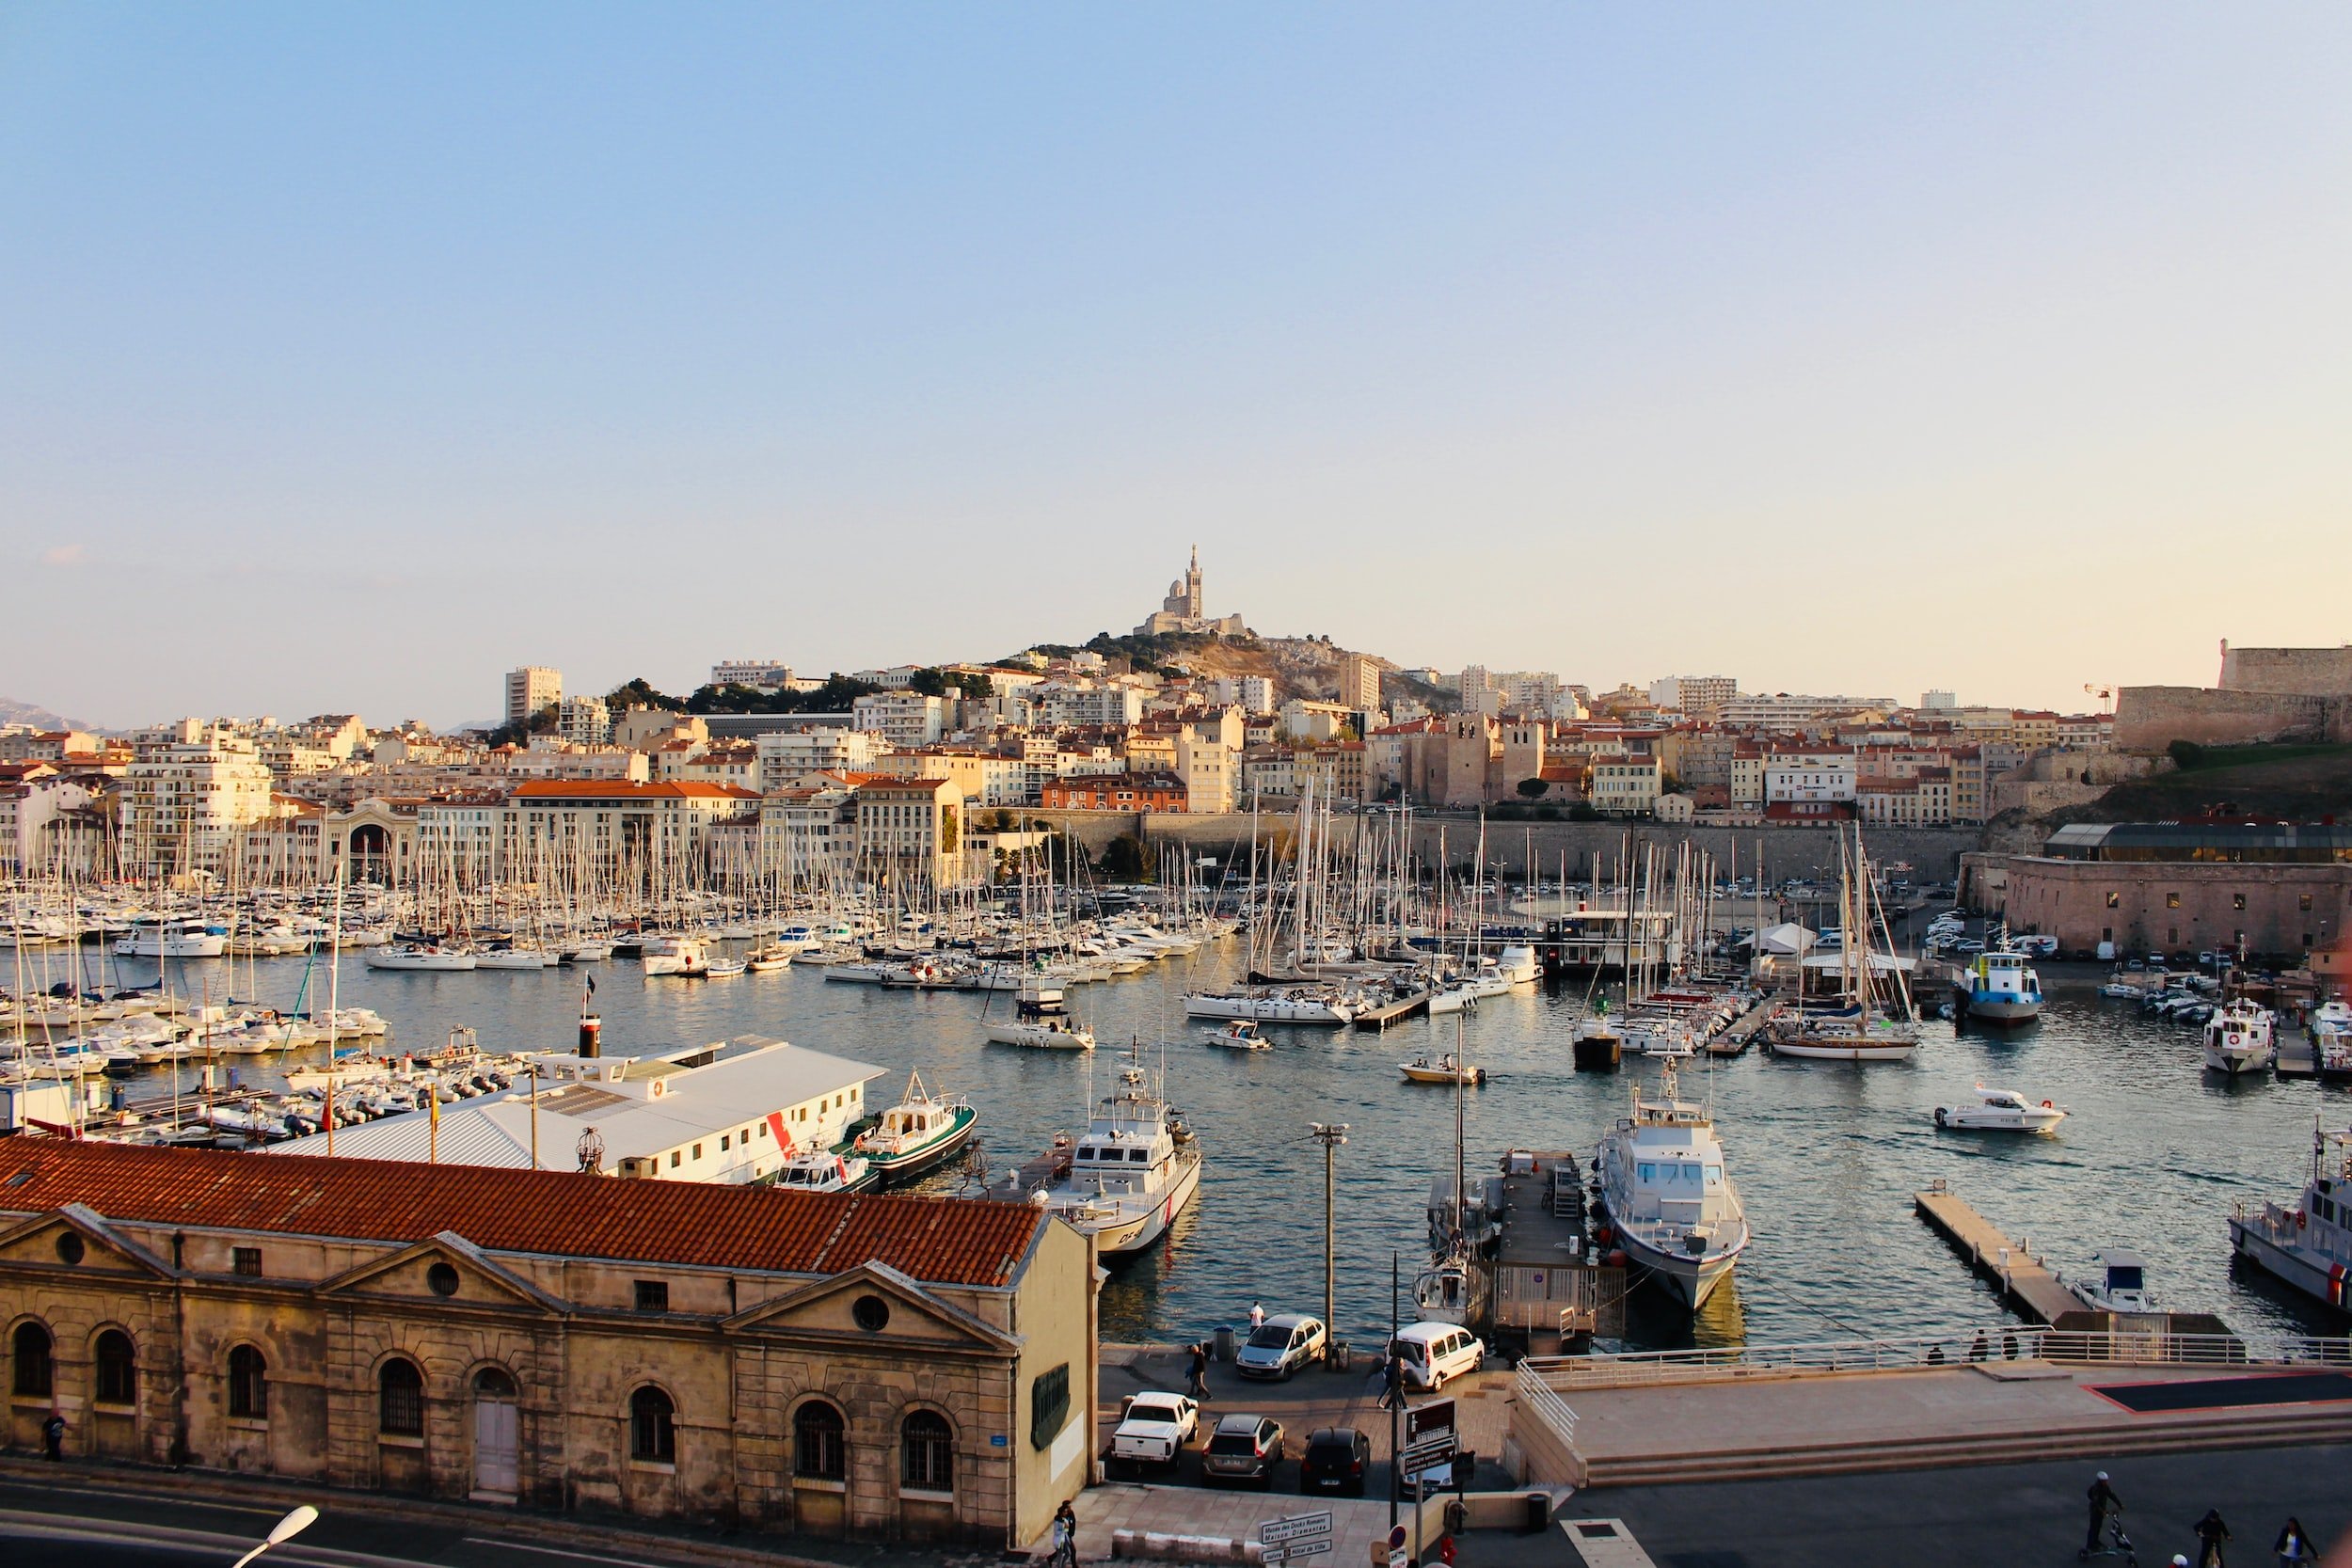 Guided tour of Marseille for a company seminar